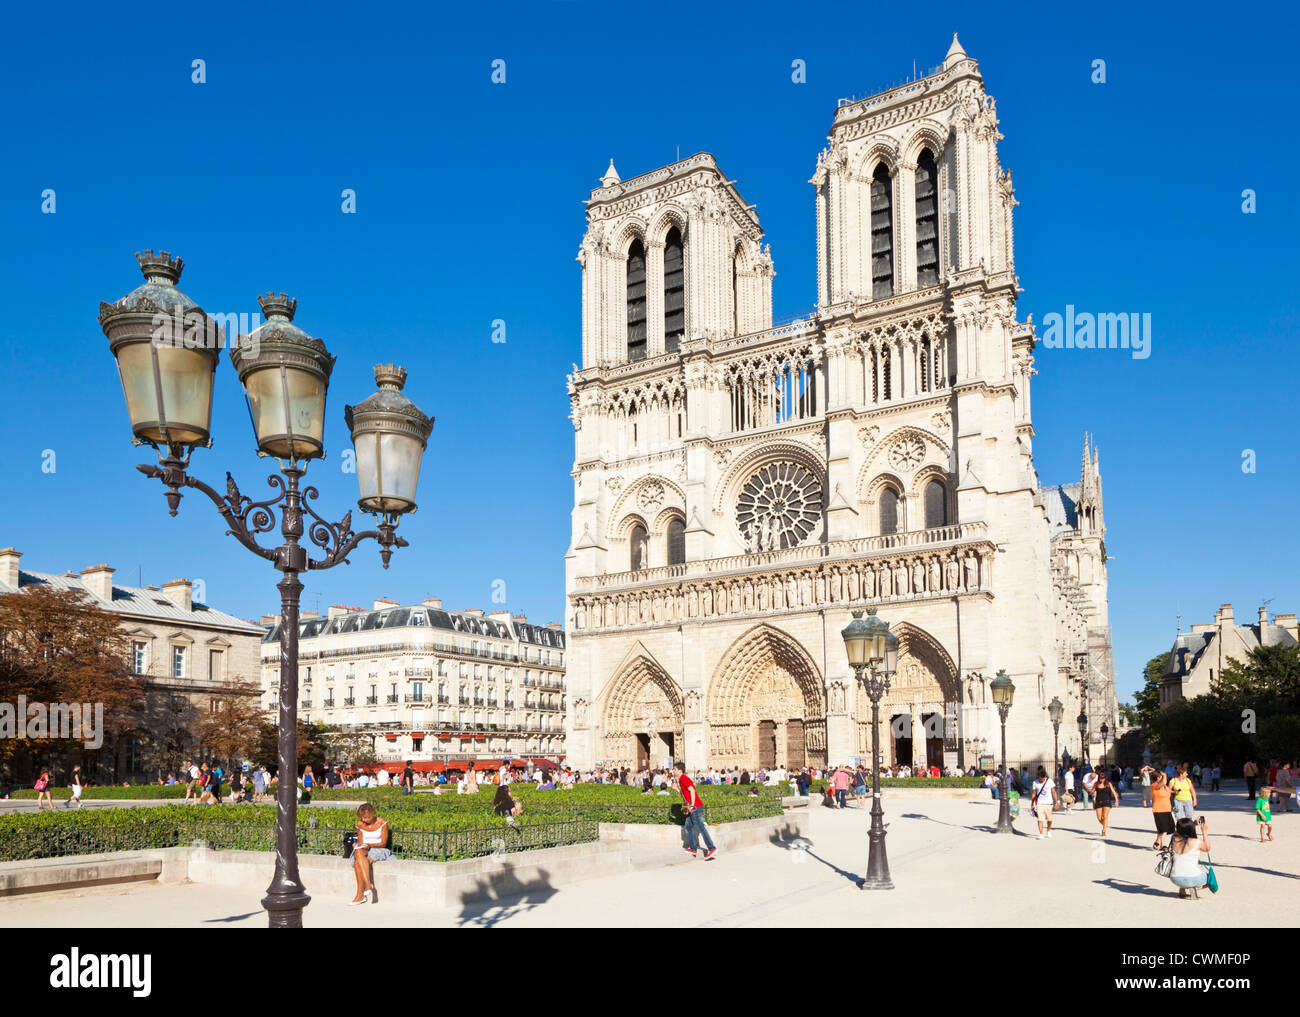 Front facade of the cathedral of Notre Dame cathedral Ille de la Cite Paris France EU Europe Stock Photo